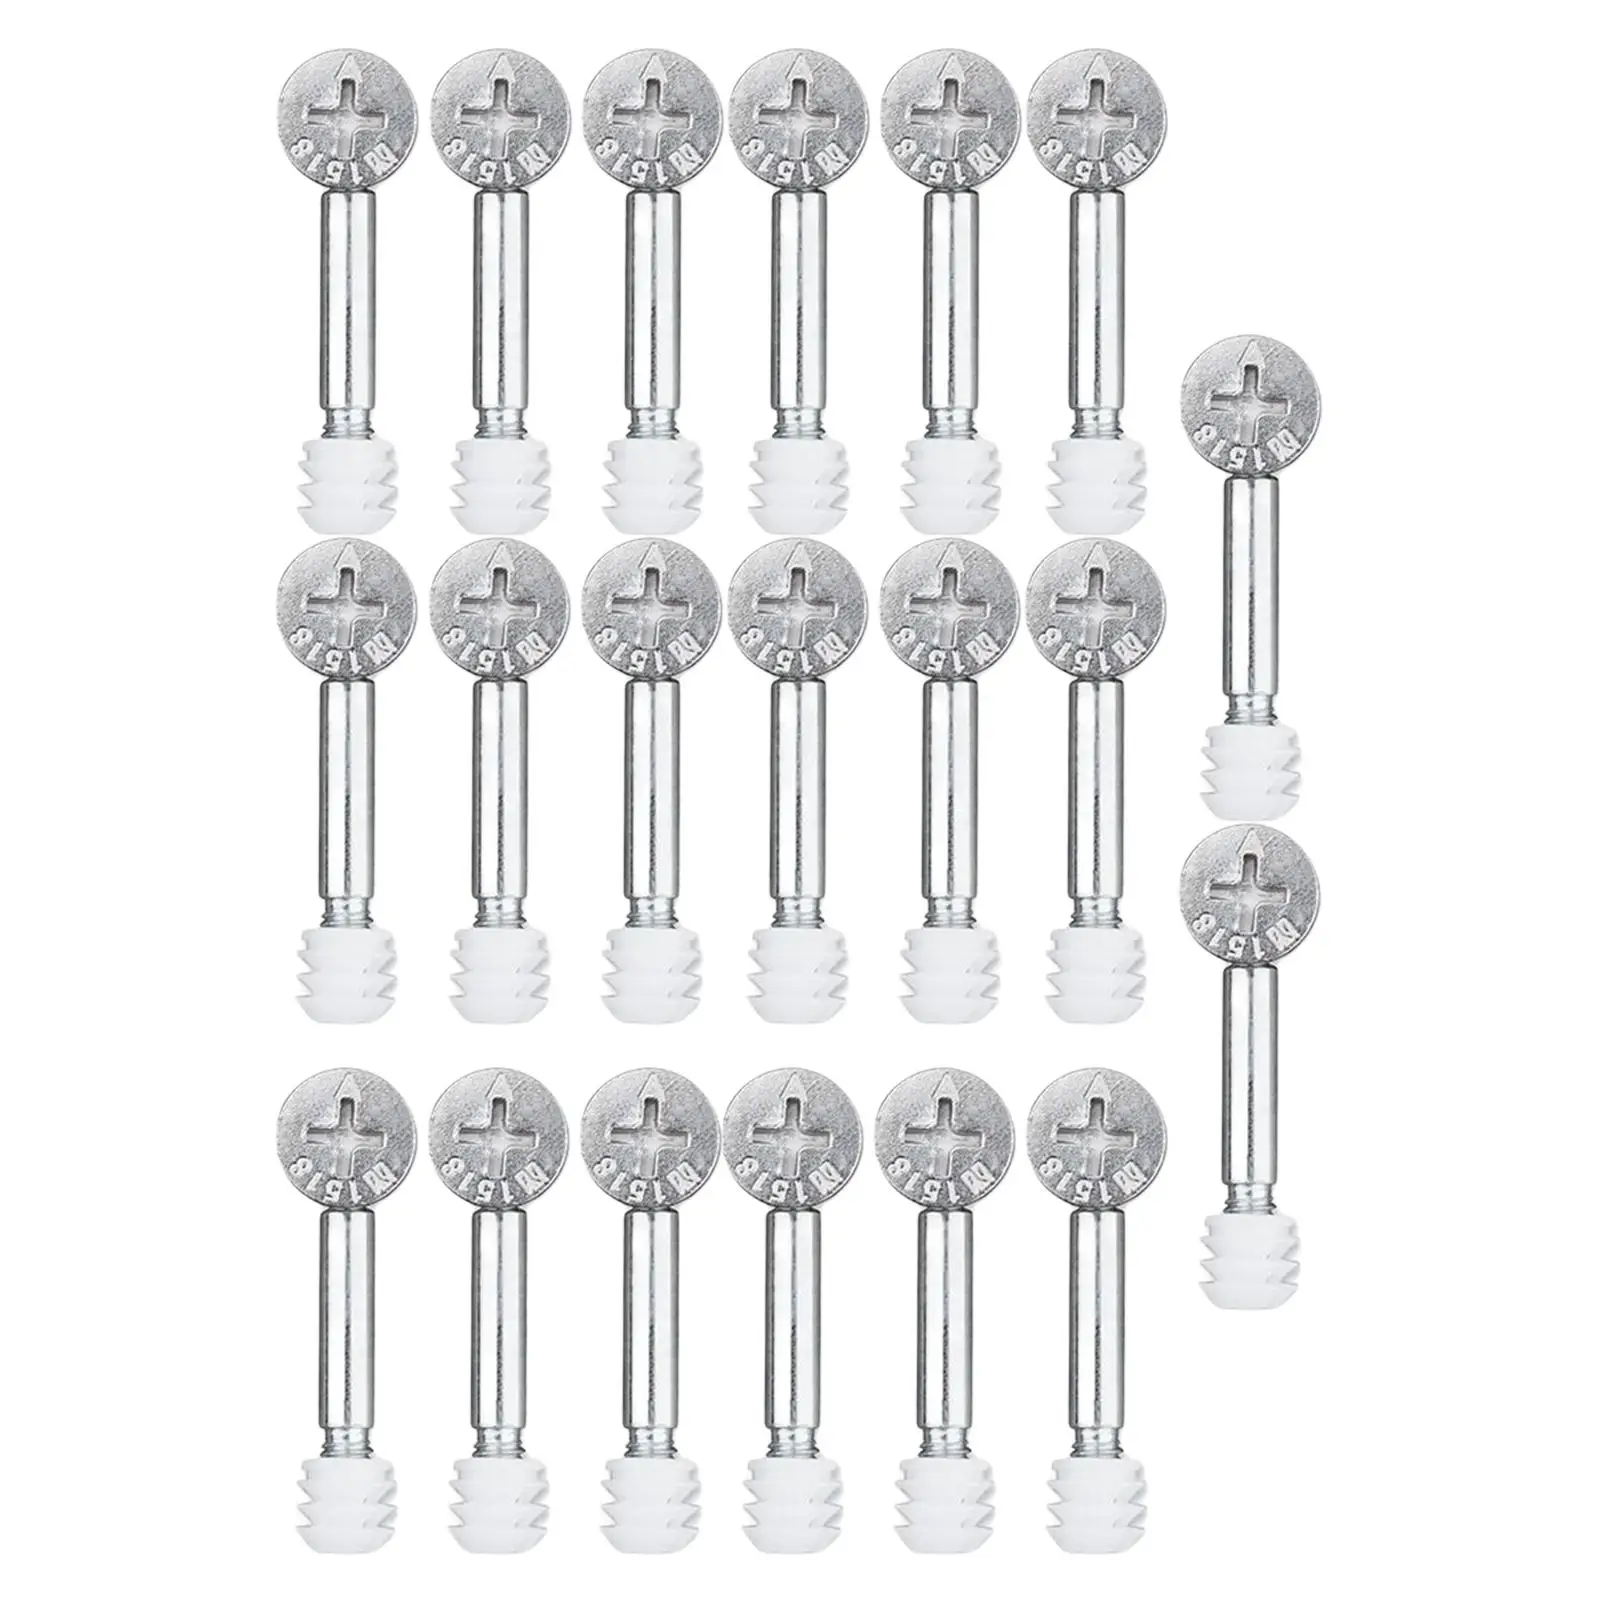 20 Sets Furniture Connecting cam Fitting Pre Inserted Nut 40mm Connecting Rod Dowel for Cabinet Drawer Dresser Bed Wardrobe